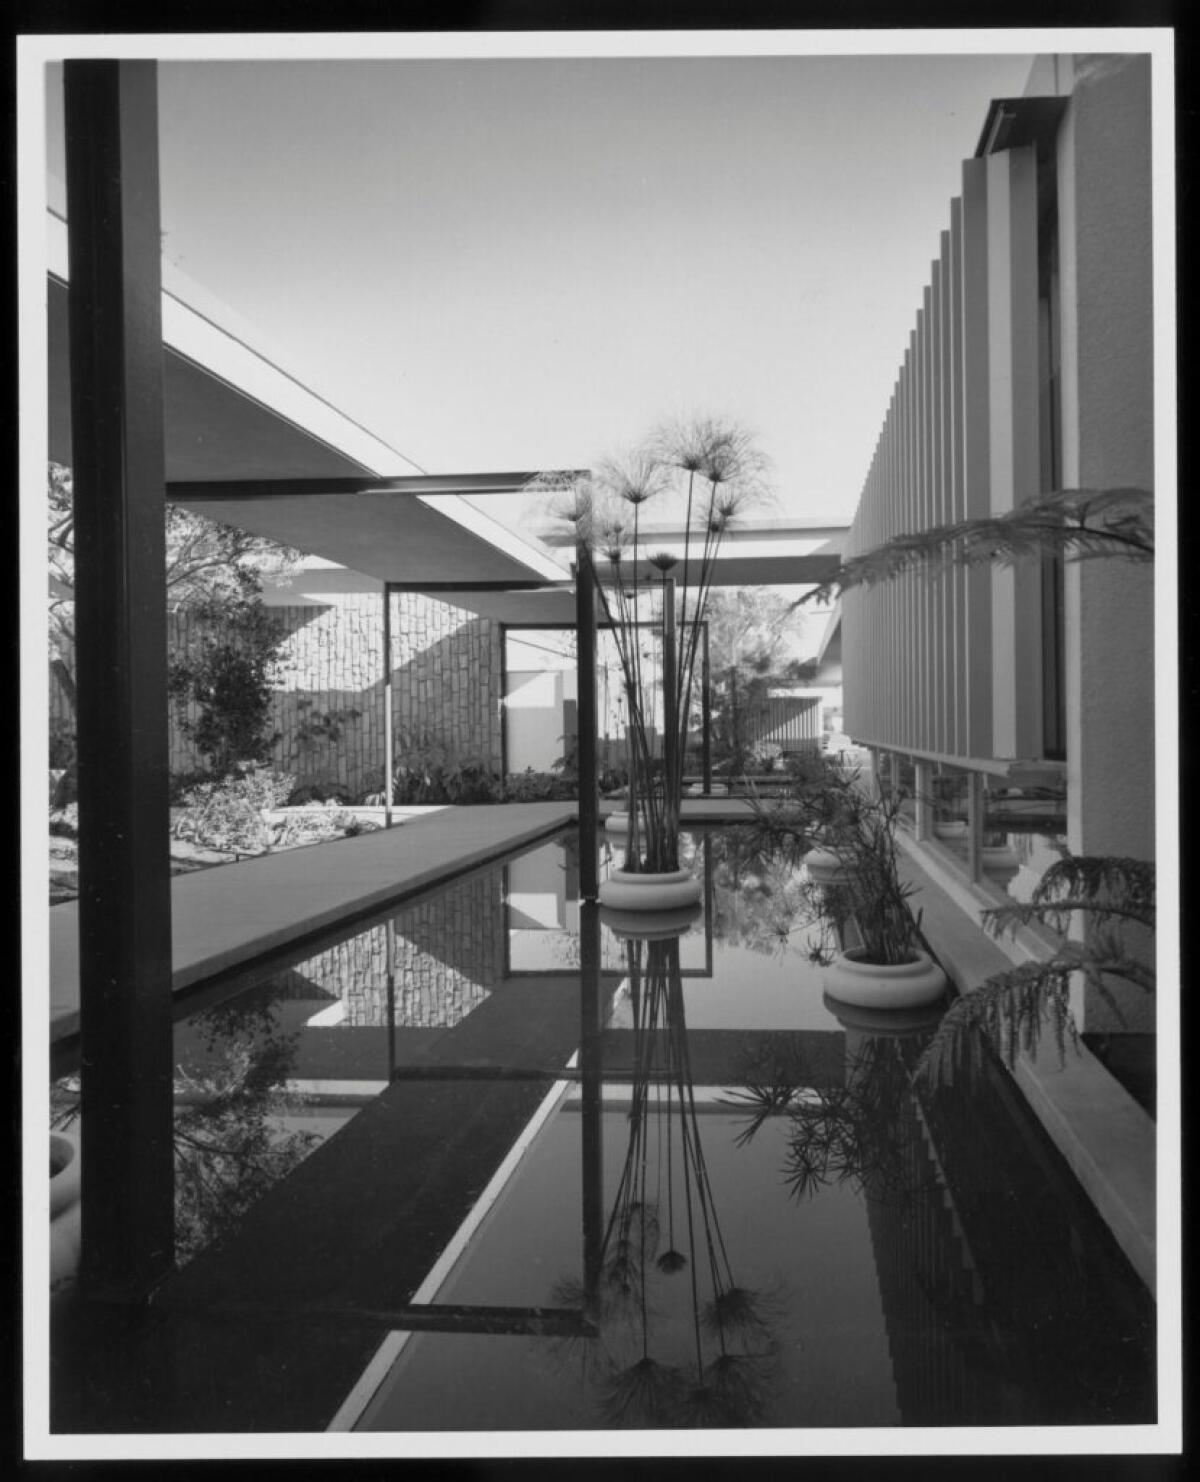 From the Julius Shulman photography archive for the years 1936-1997.